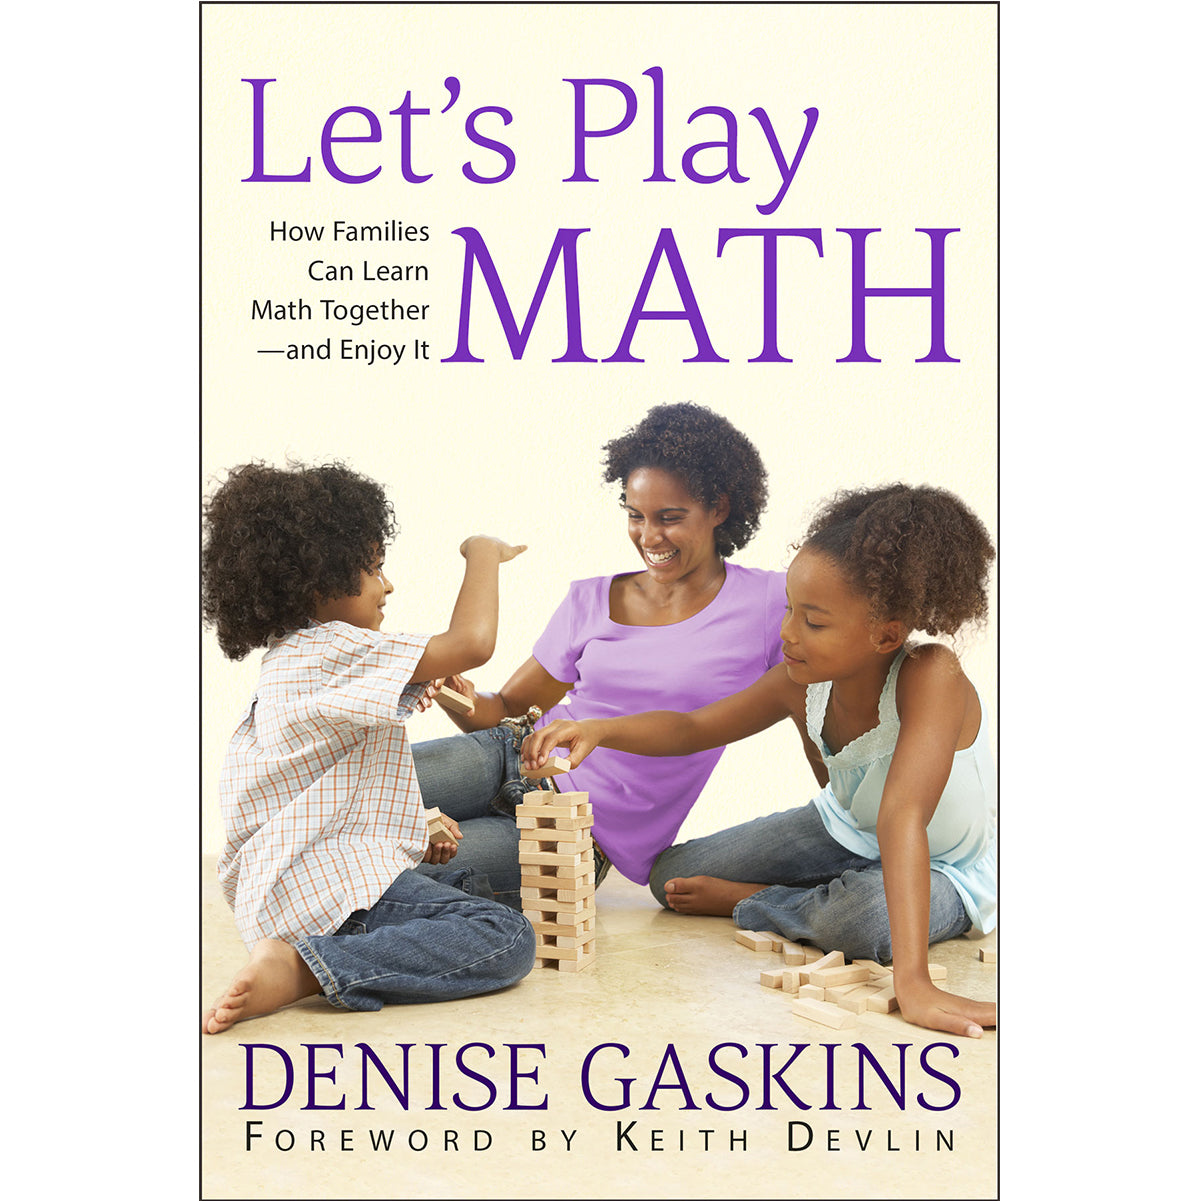 Let's Play Math paperback by Denise Gaskins